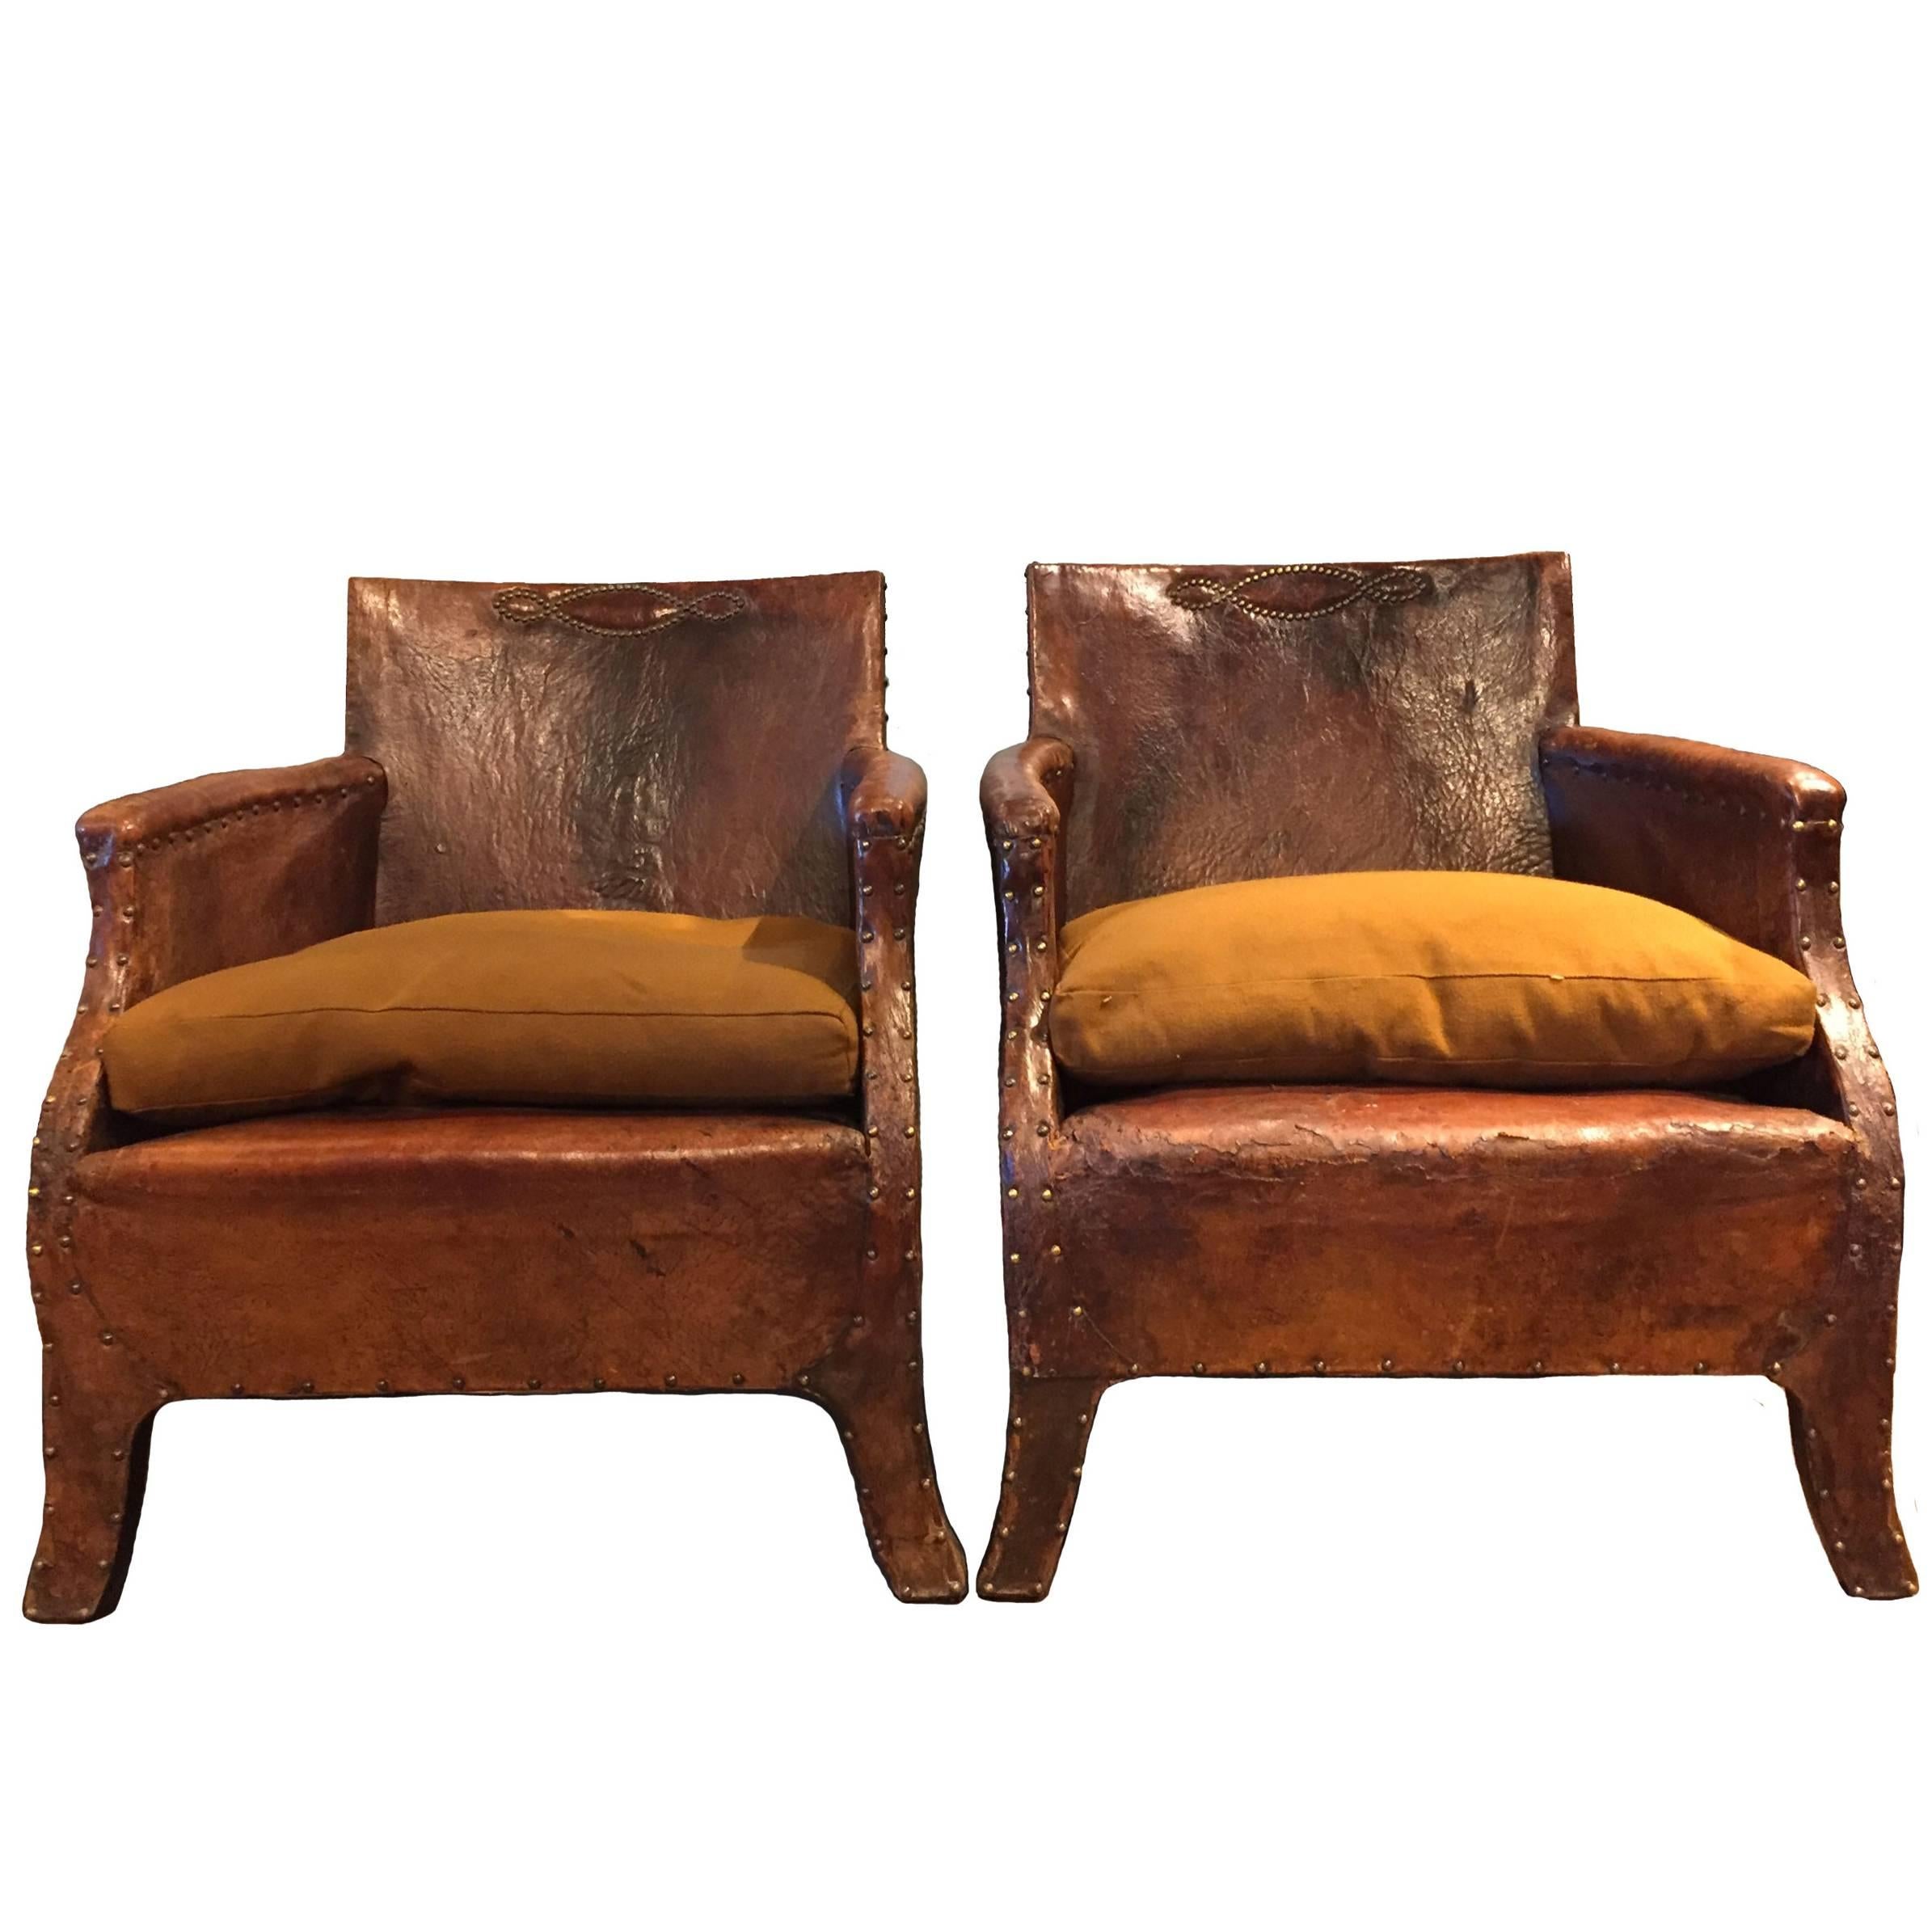 Pair of Leather Chairs, circa 1930